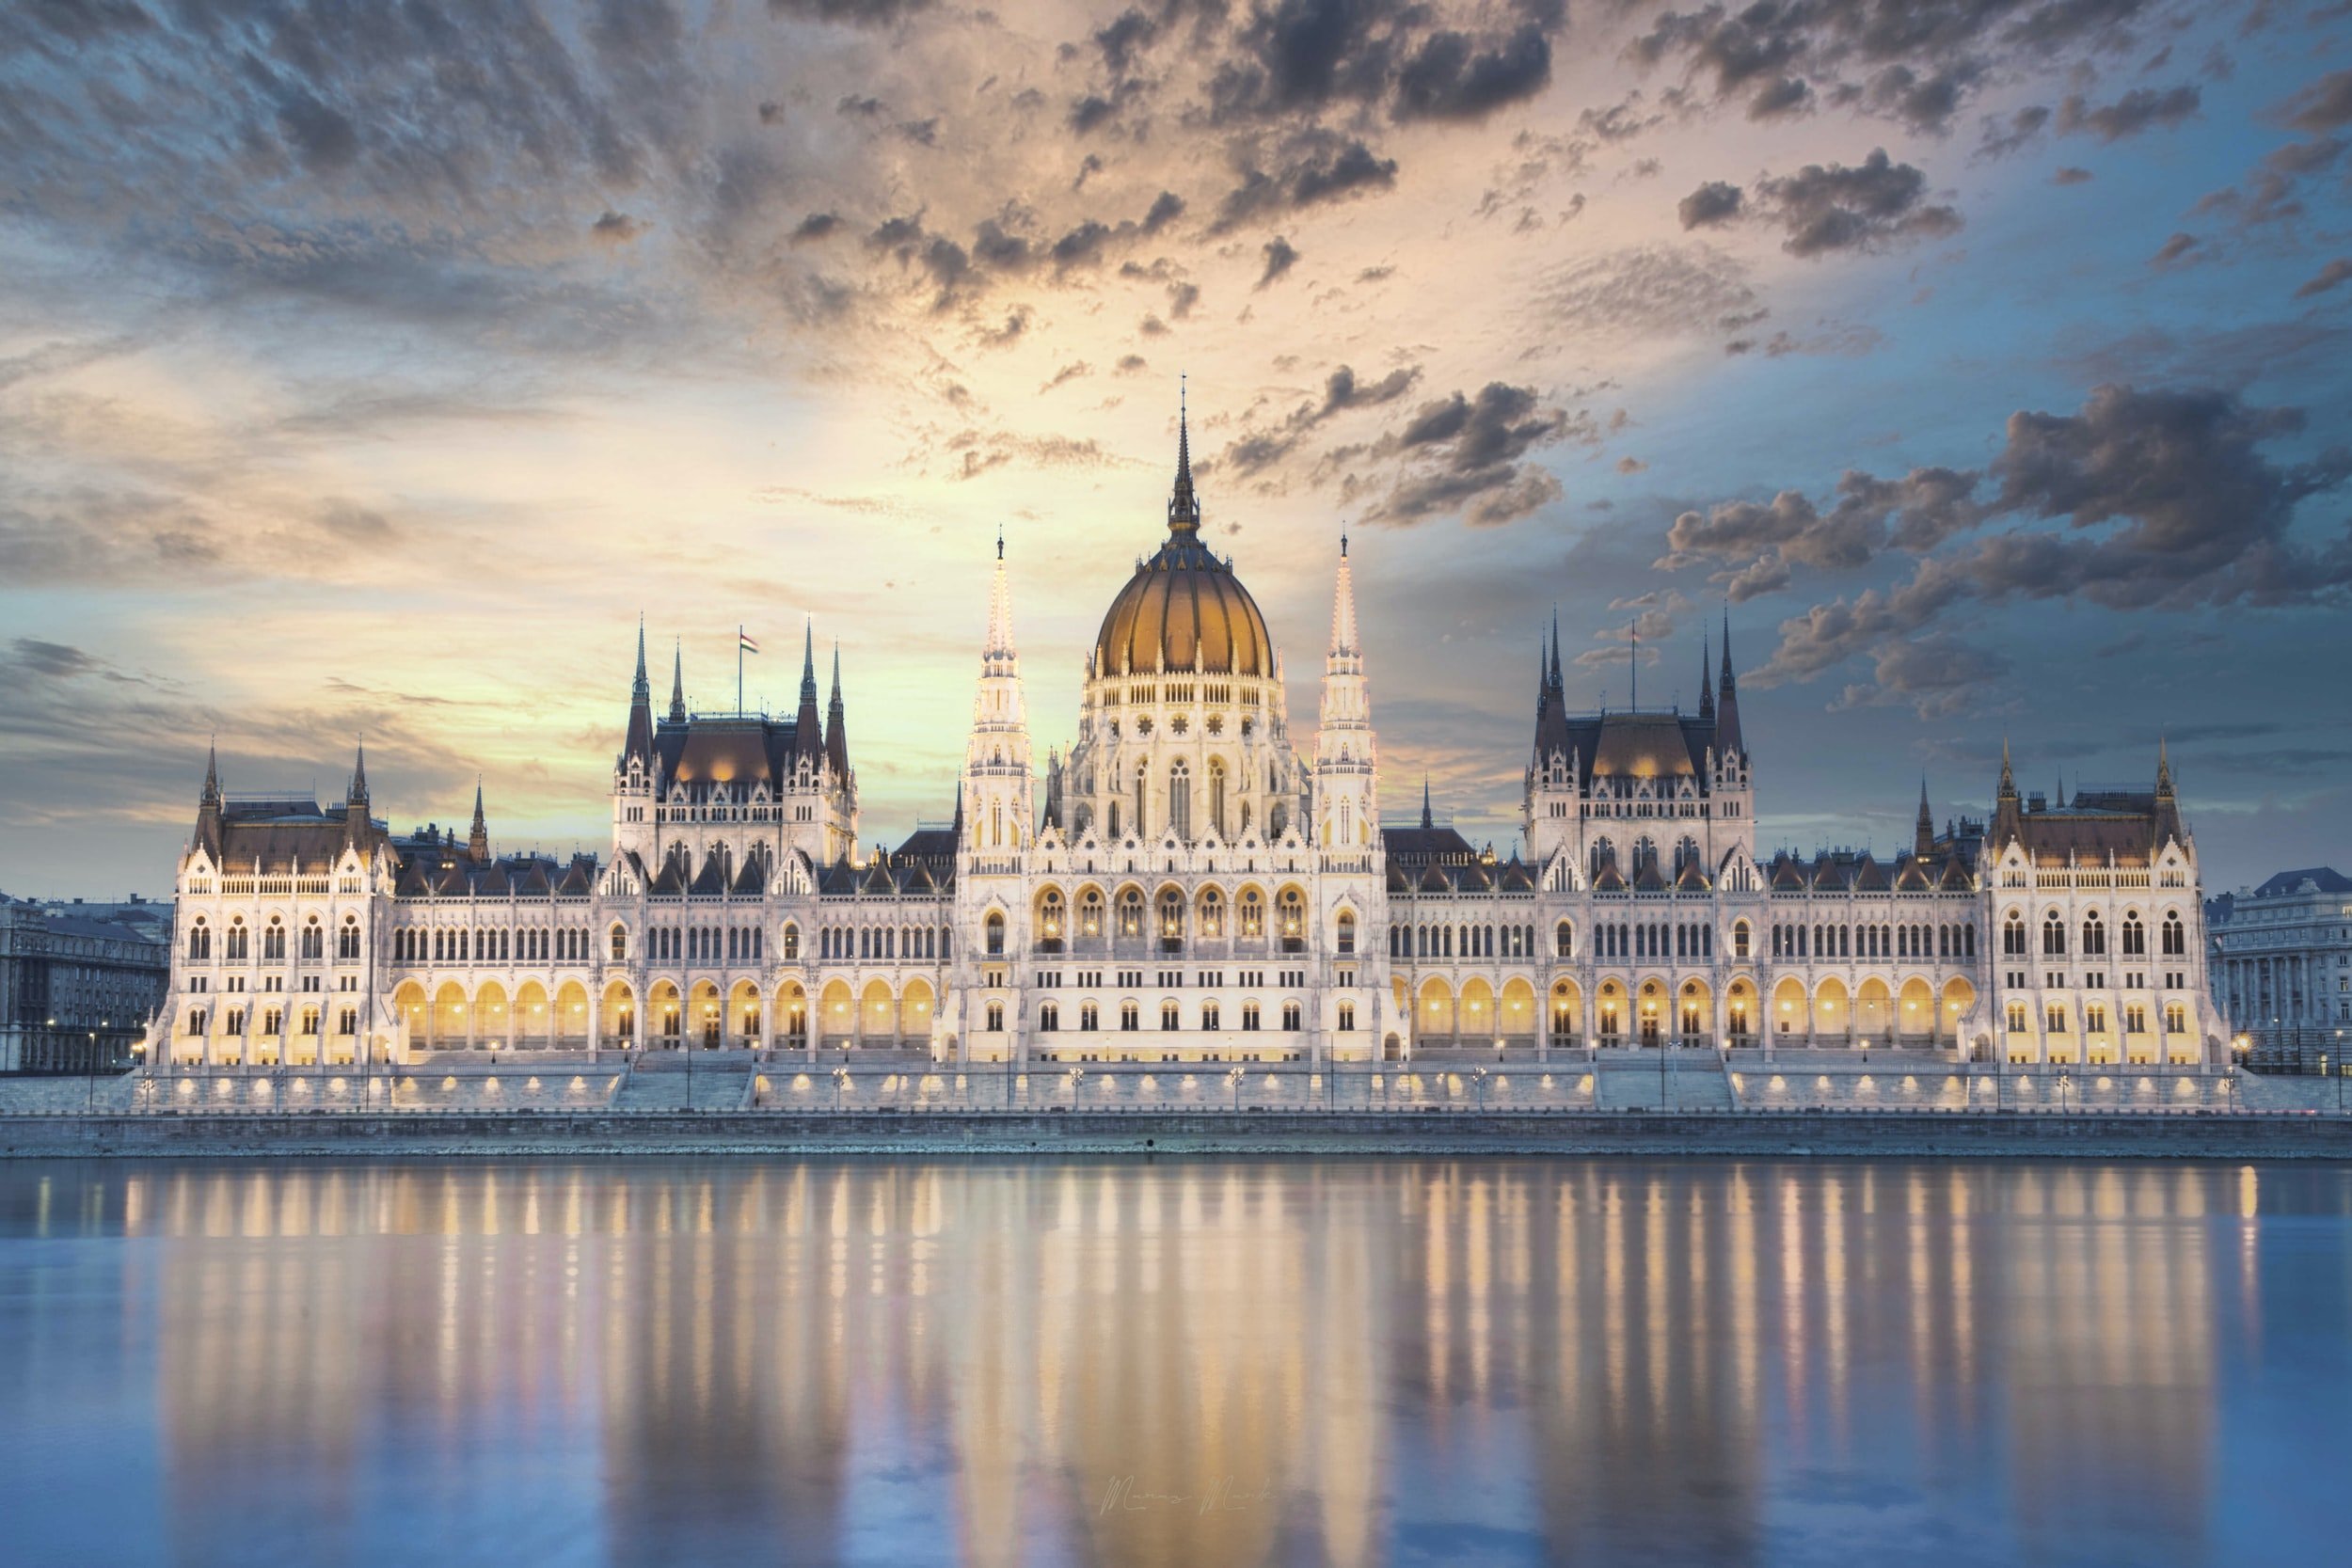 Budapest Parliament Building reflecting over the river